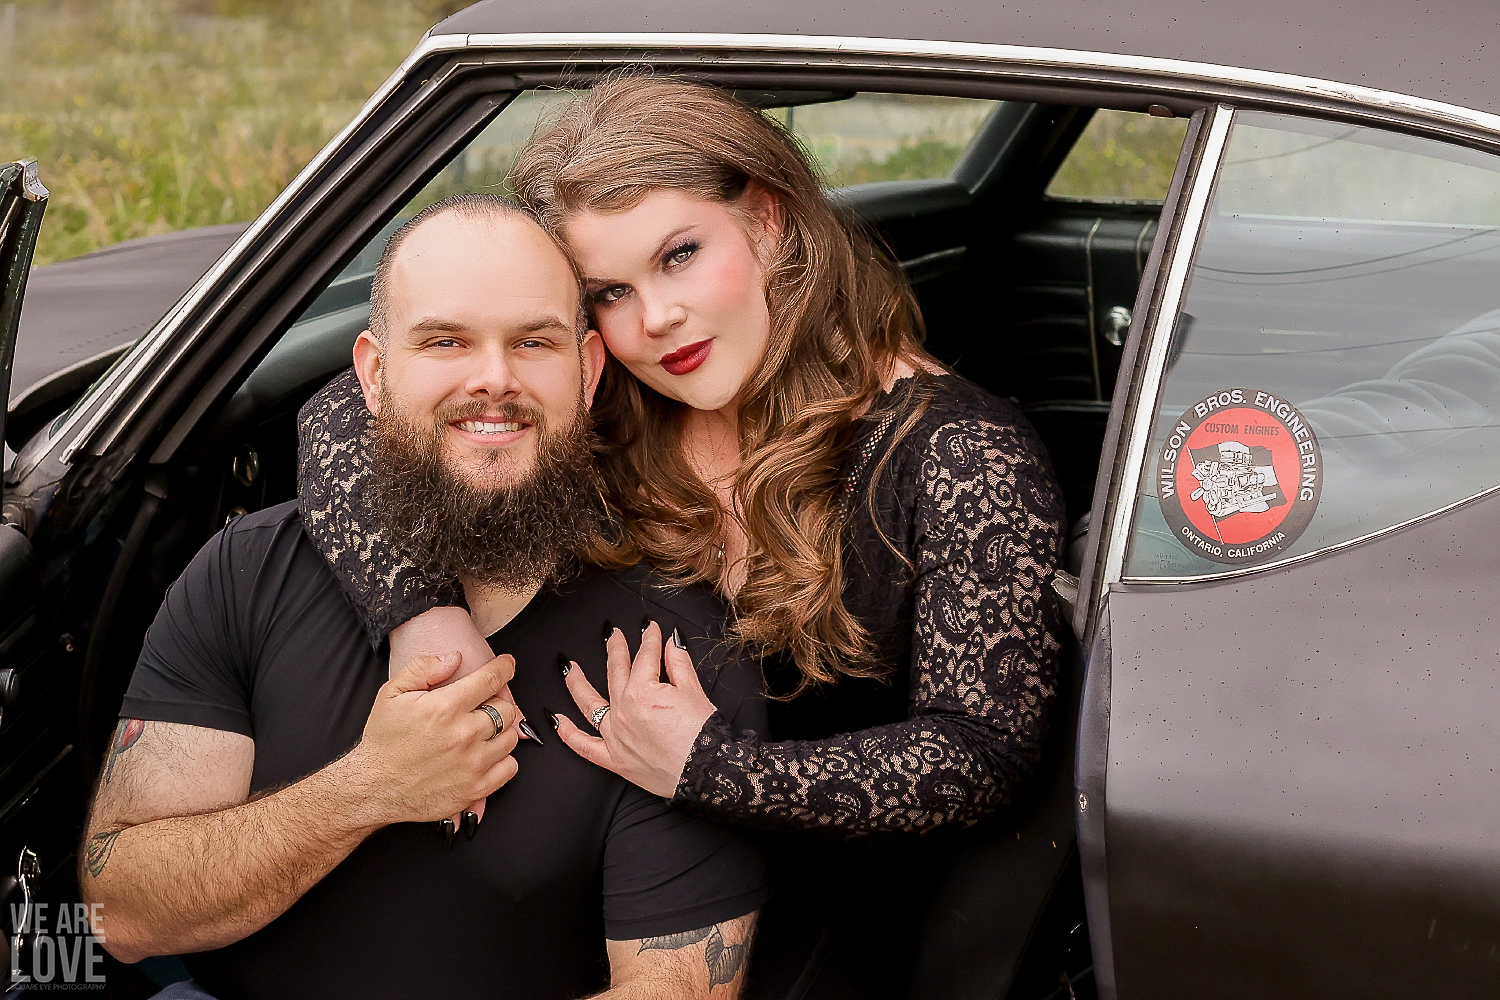 witchy_engagement_photoshoot_los_angeles_5